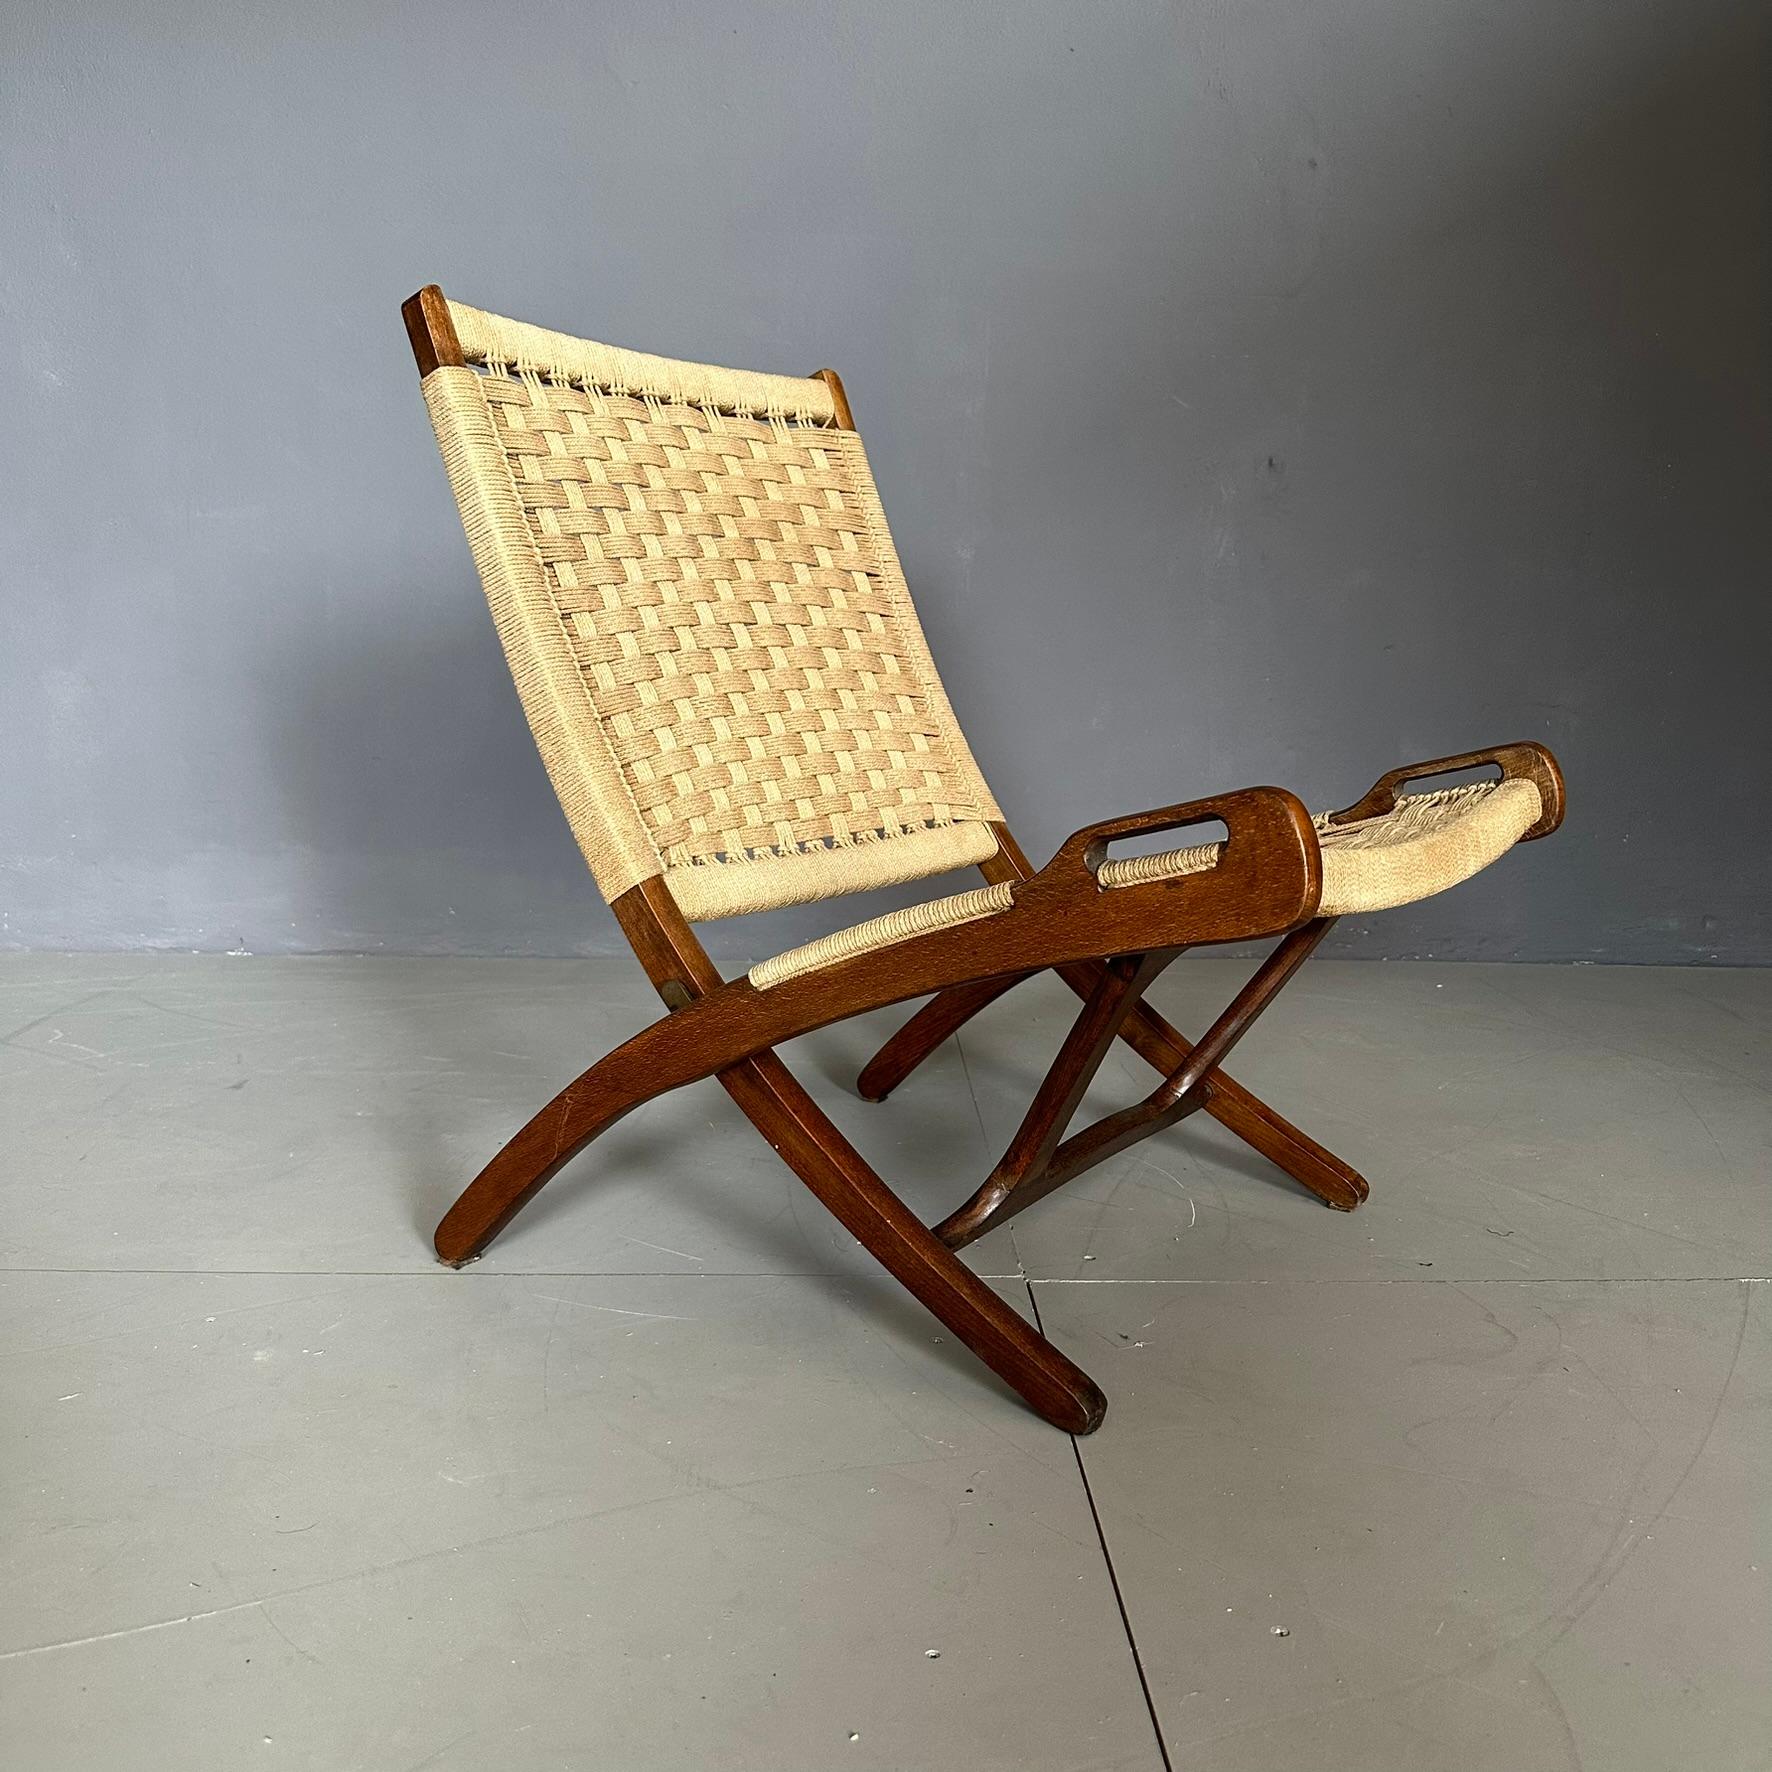 Sixties armchair, English manufacture.
The armchair has a solid wood structure, with rope seat and backrest with brass buttons.
The armchair is foldable.
Seat depth: 48cm
